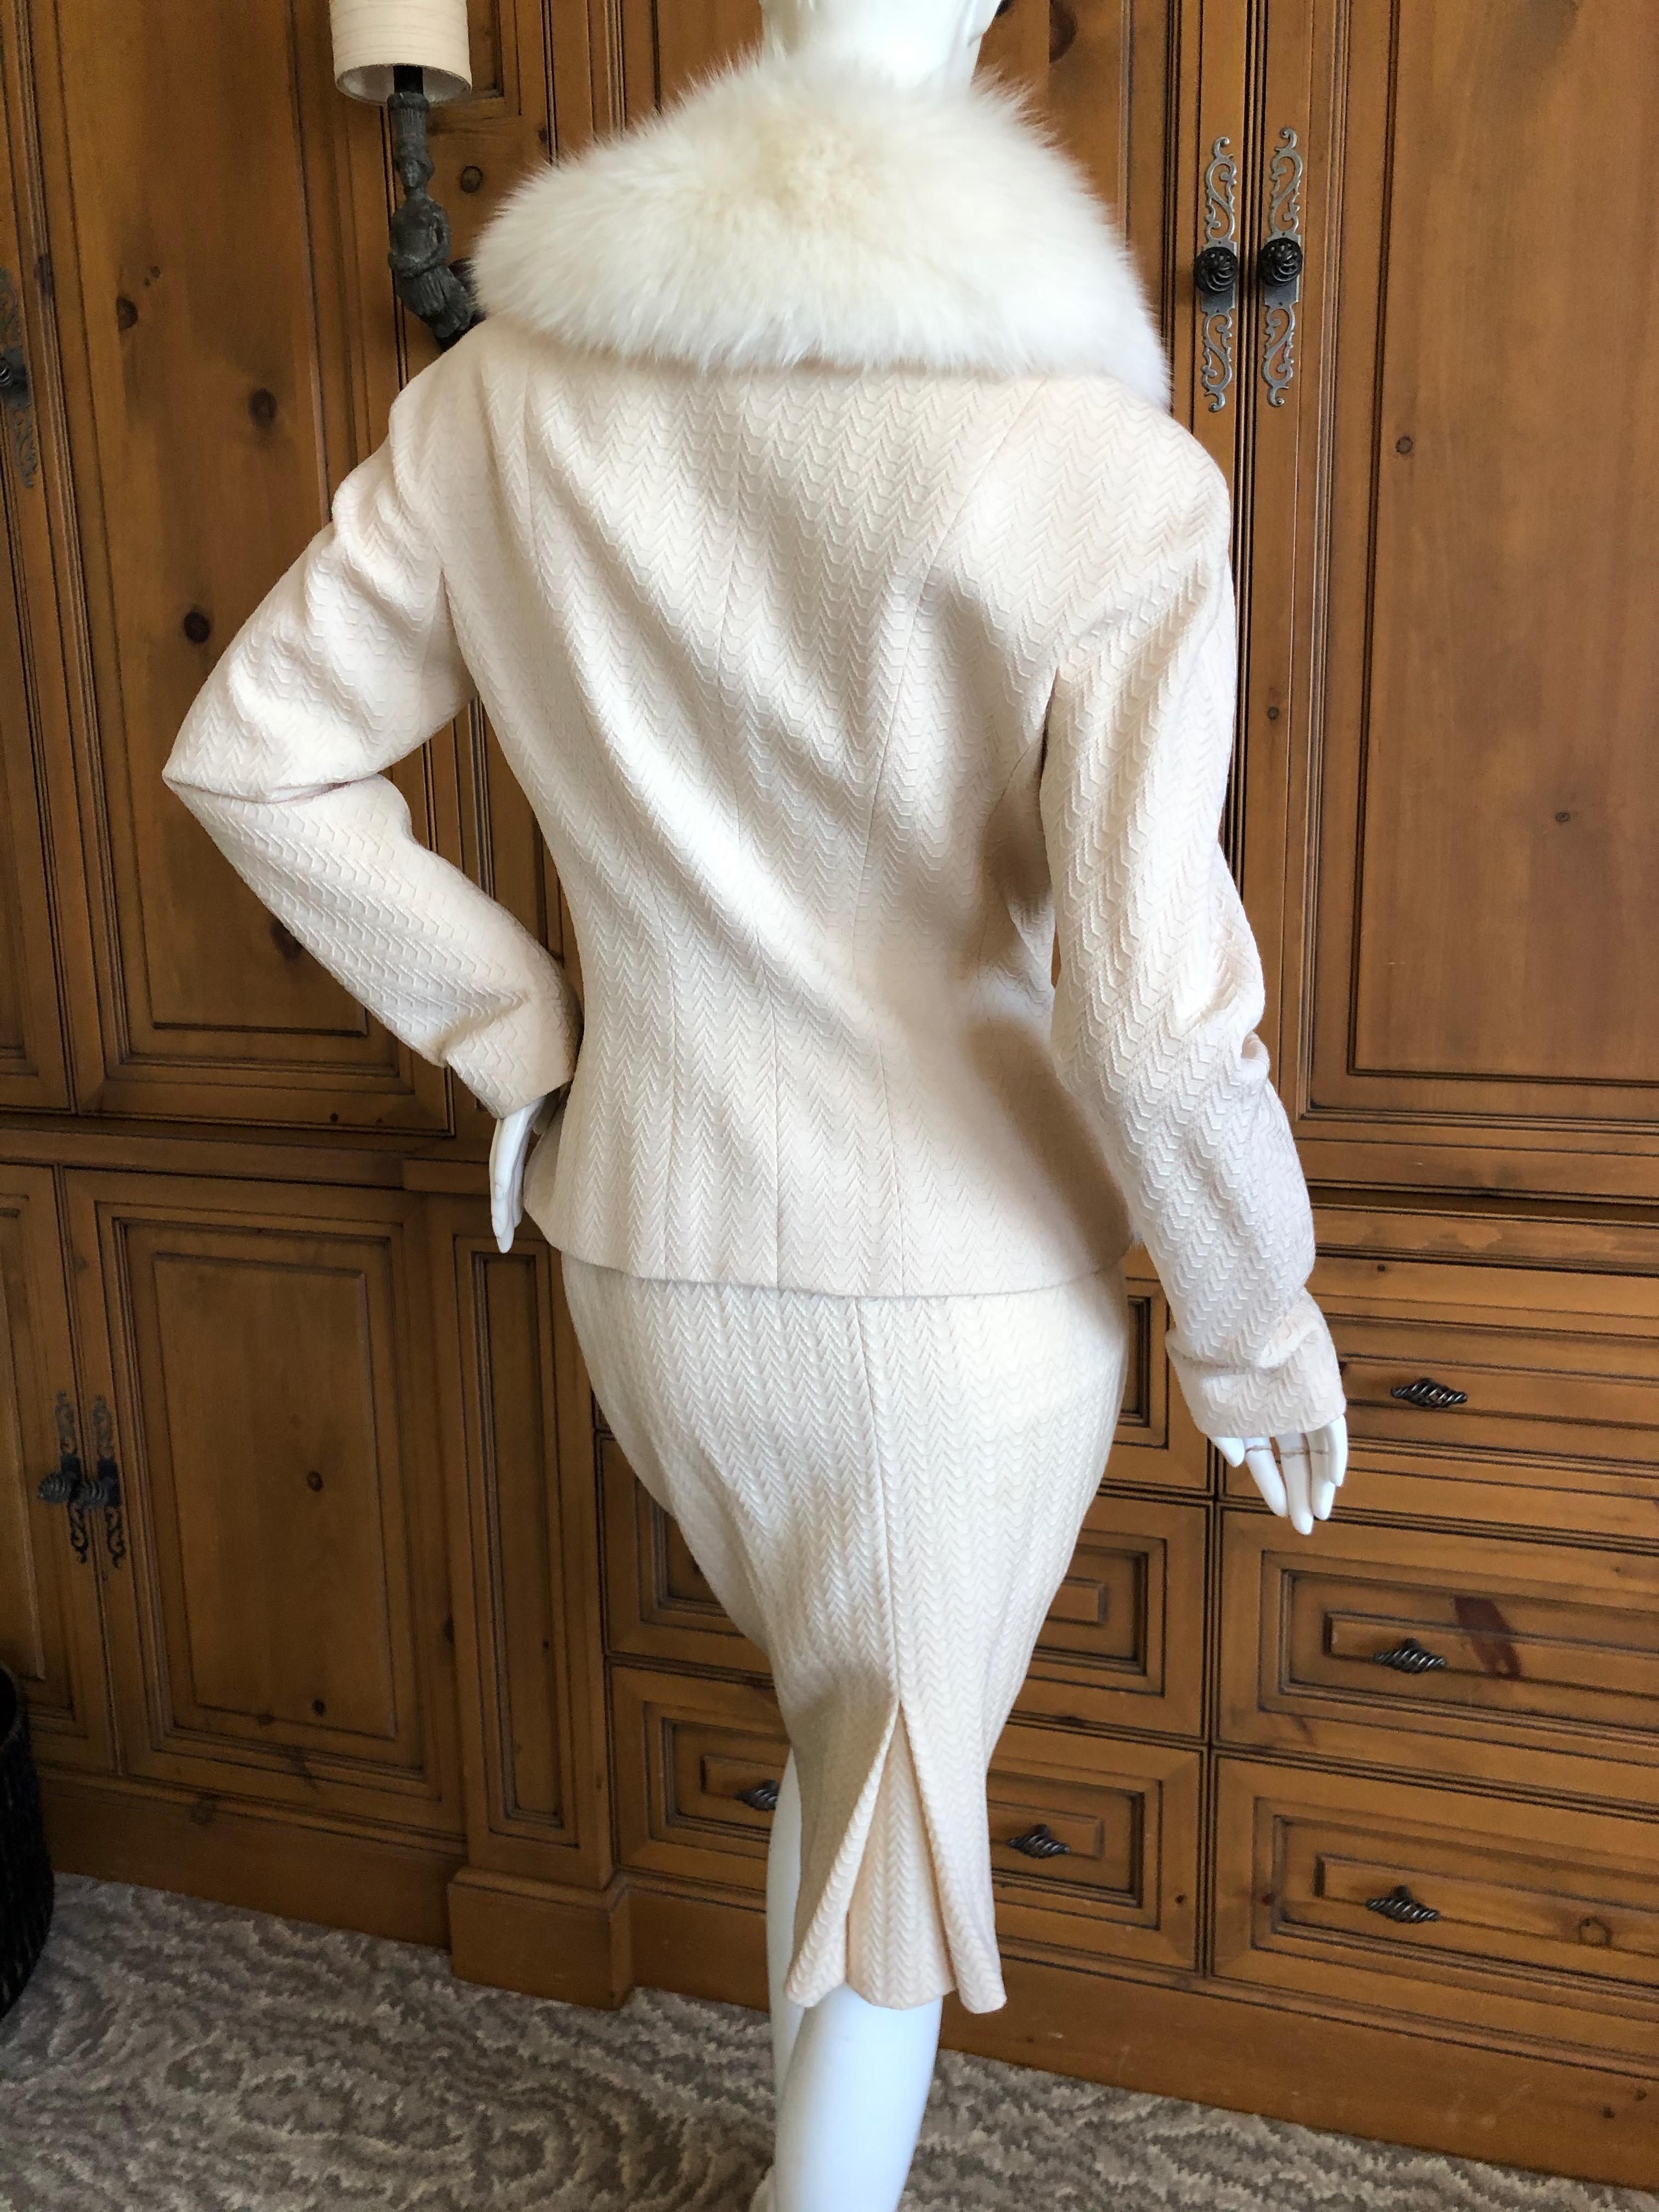  Christian Dior AW '97 by John Galliano Vintage Fox Fur Trim Jacket & Skirt Suit In Excellent Condition For Sale In Cloverdale, CA